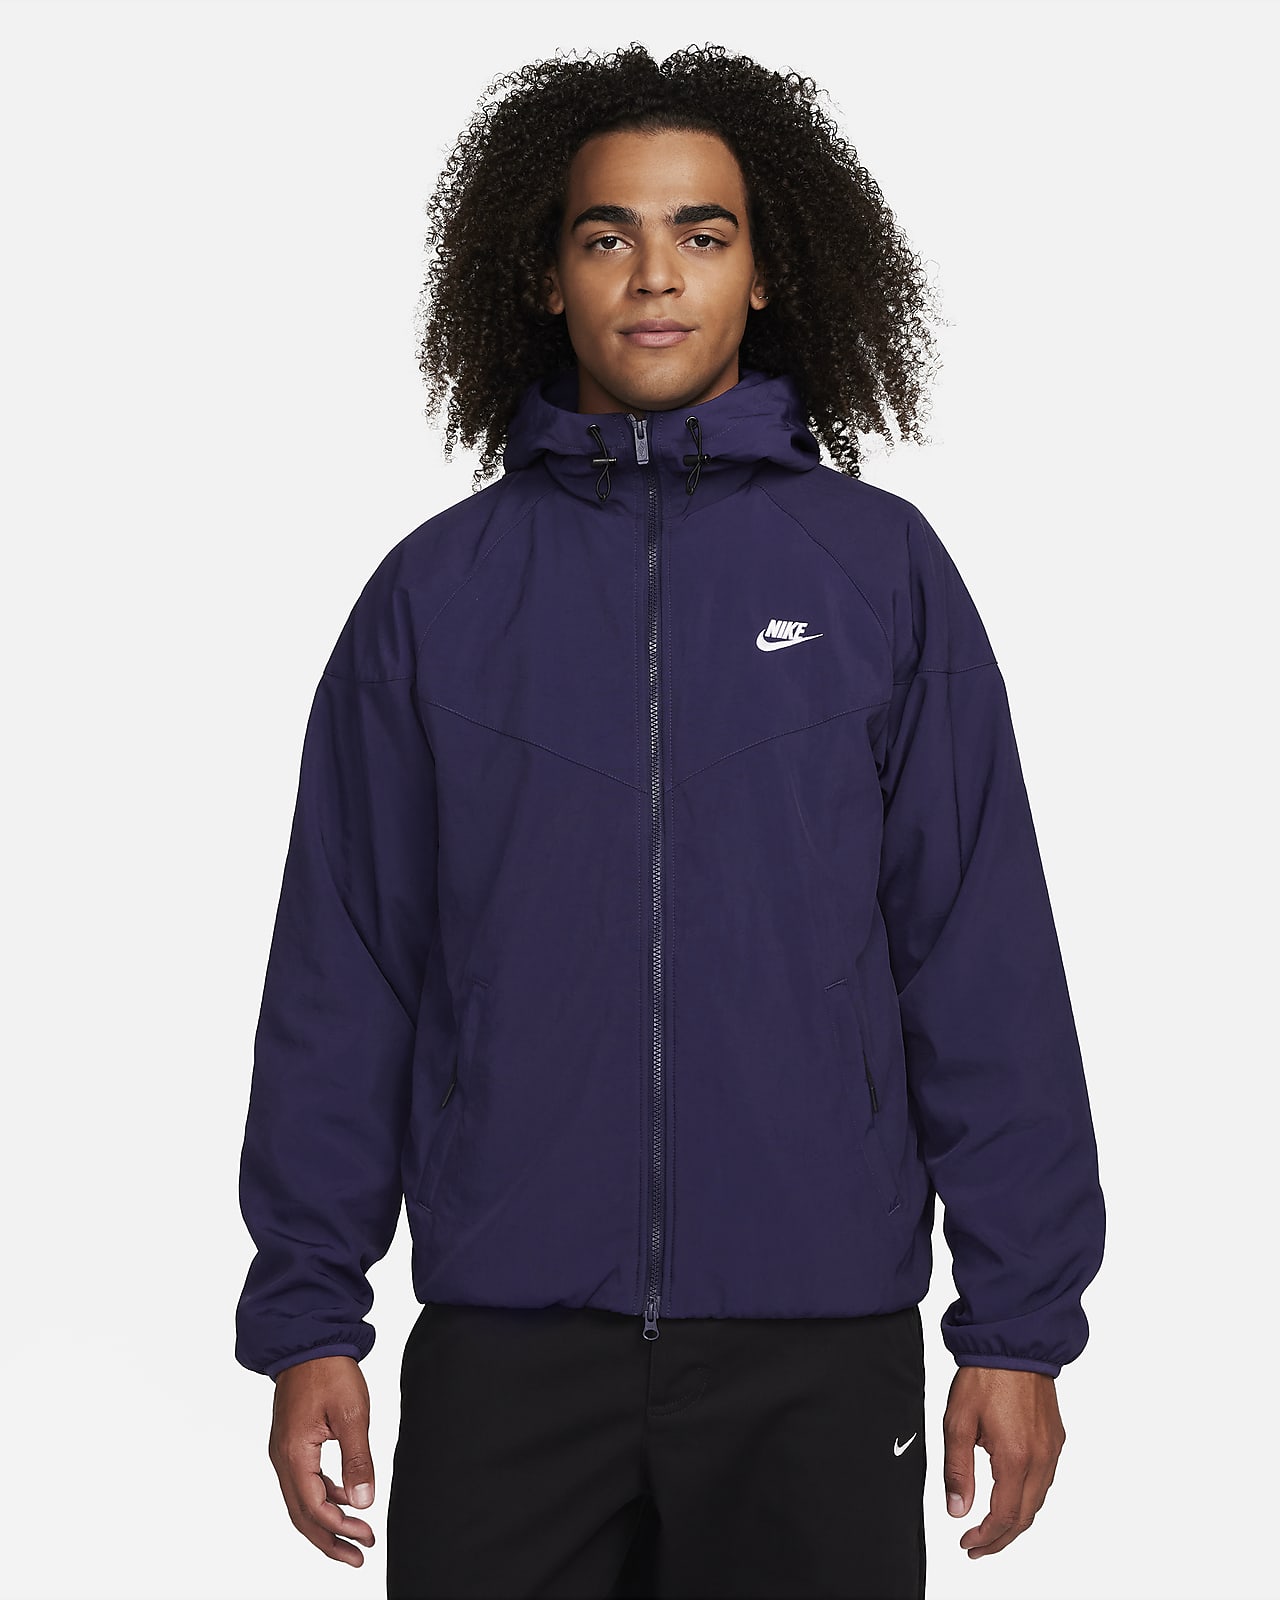 https://static.nike.com/a/images/t_PDP_1280_v1/f_auto,q_auto:eco/22bbea56-b5ae-4ccc-9095-4f477a3a4b89/sportswear-windrunner-loose-hooded-jacket-dNXhT6.png